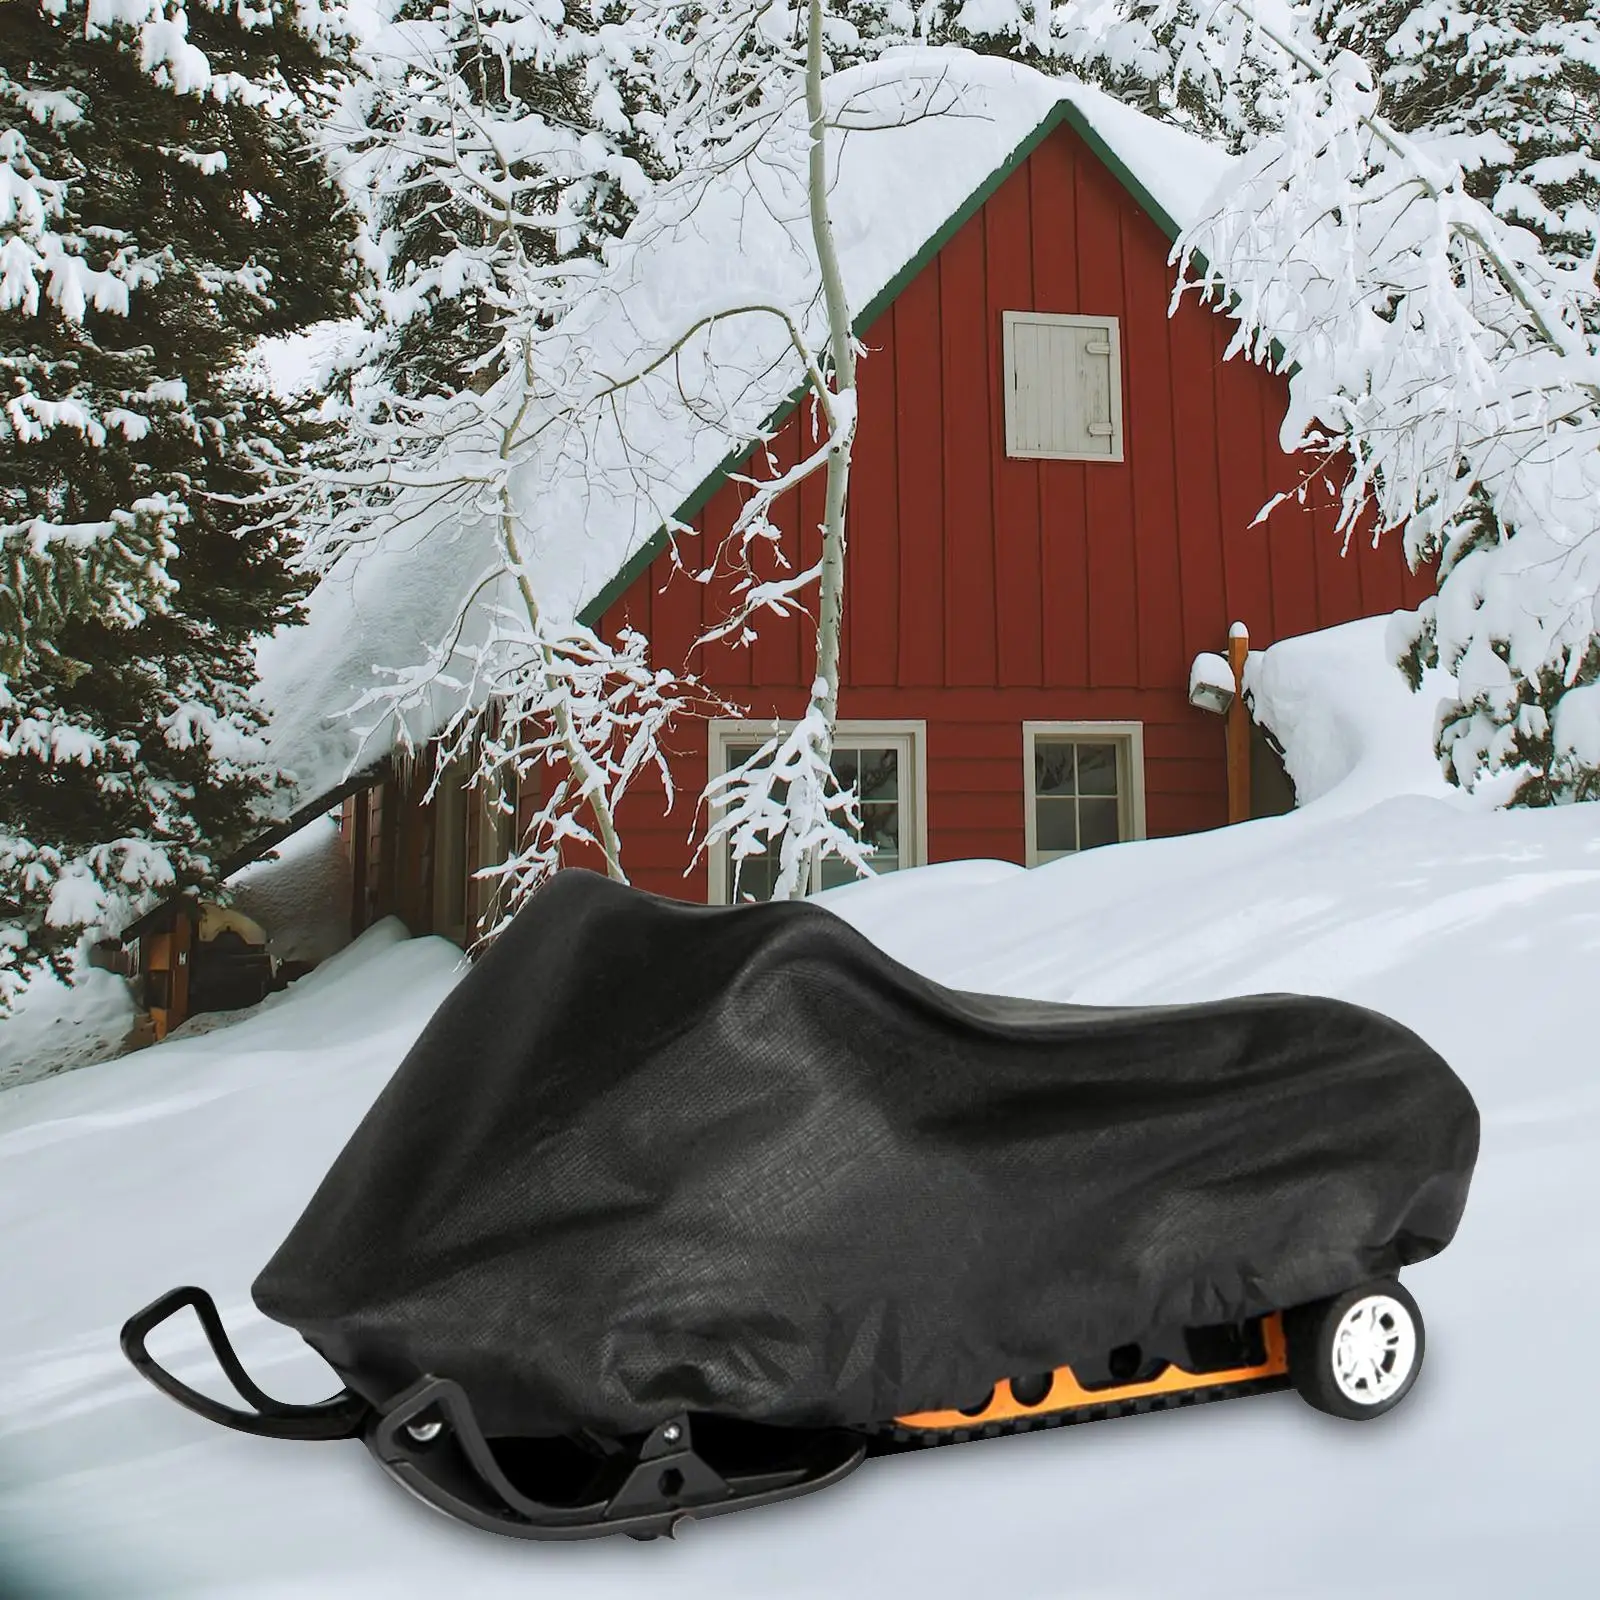 Universal Snow Sled Storage Covers Rain Cover Professional Shield Dustproof Snowmobile Travel Covers for Snow Sledge Sledding